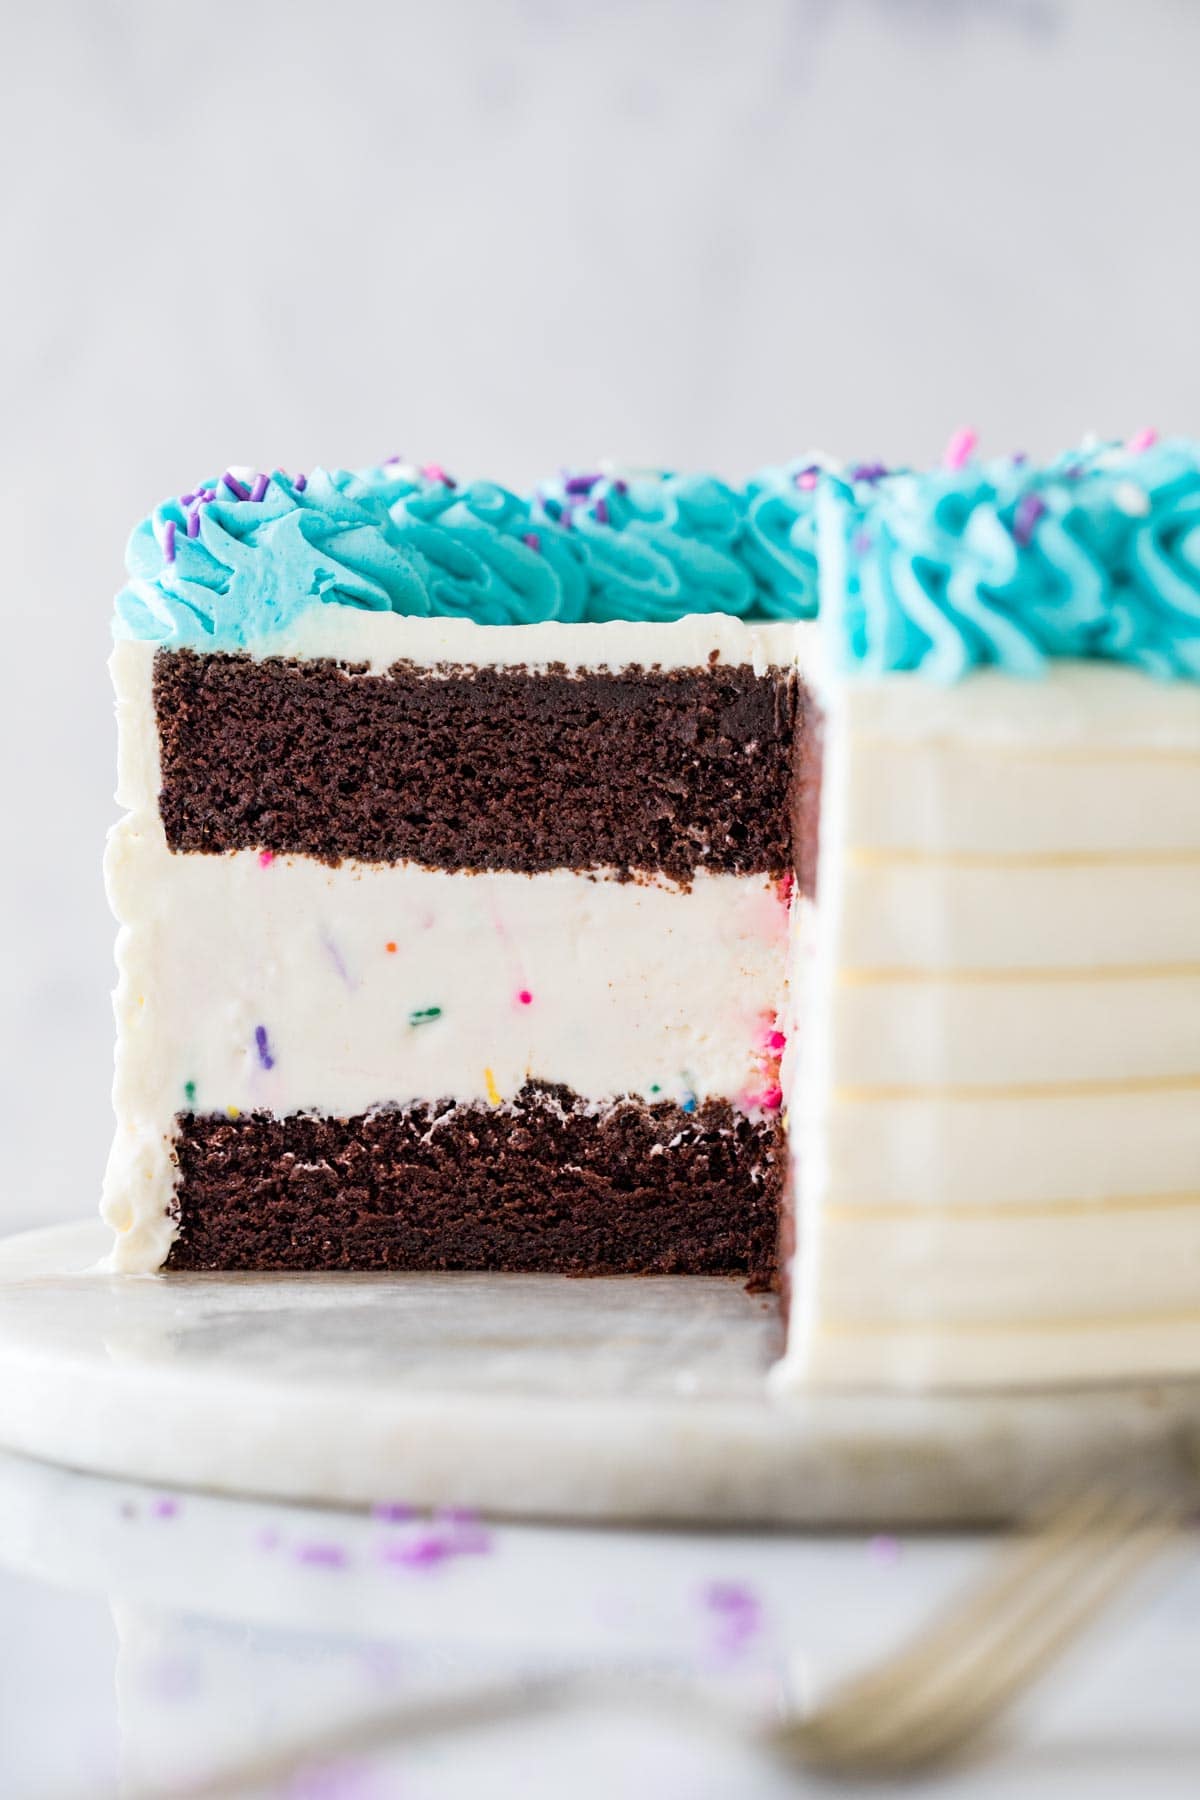 close-up view of the interior of an ice cream cake made with chocolate cake, vanilla ice cream, and turquoise whipped cream frosting